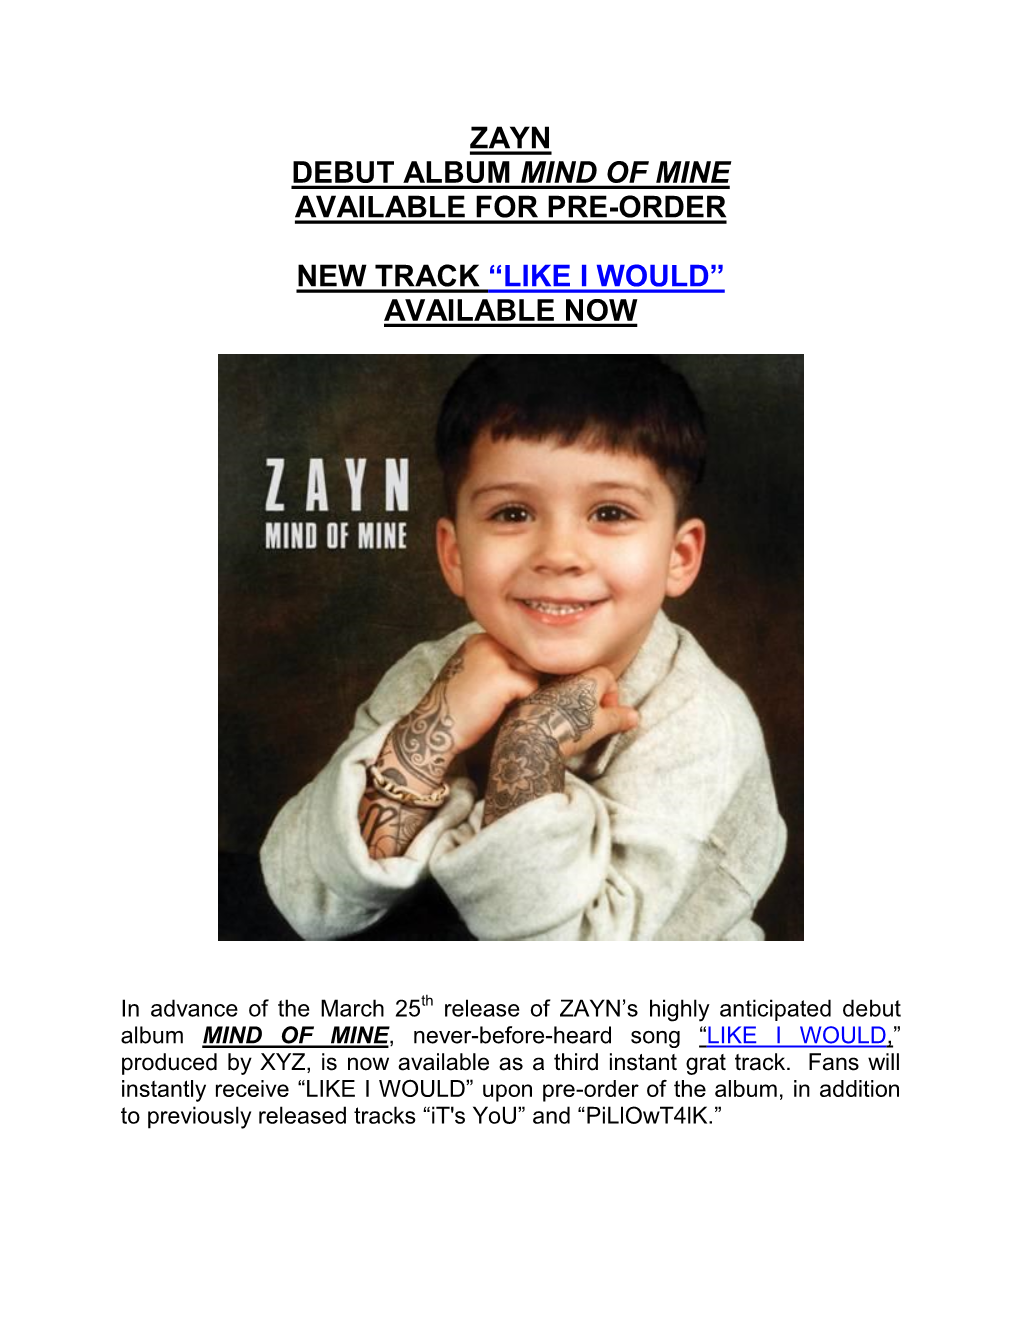 Zayn Debut Album Mind of Mine Available for Pre-Order